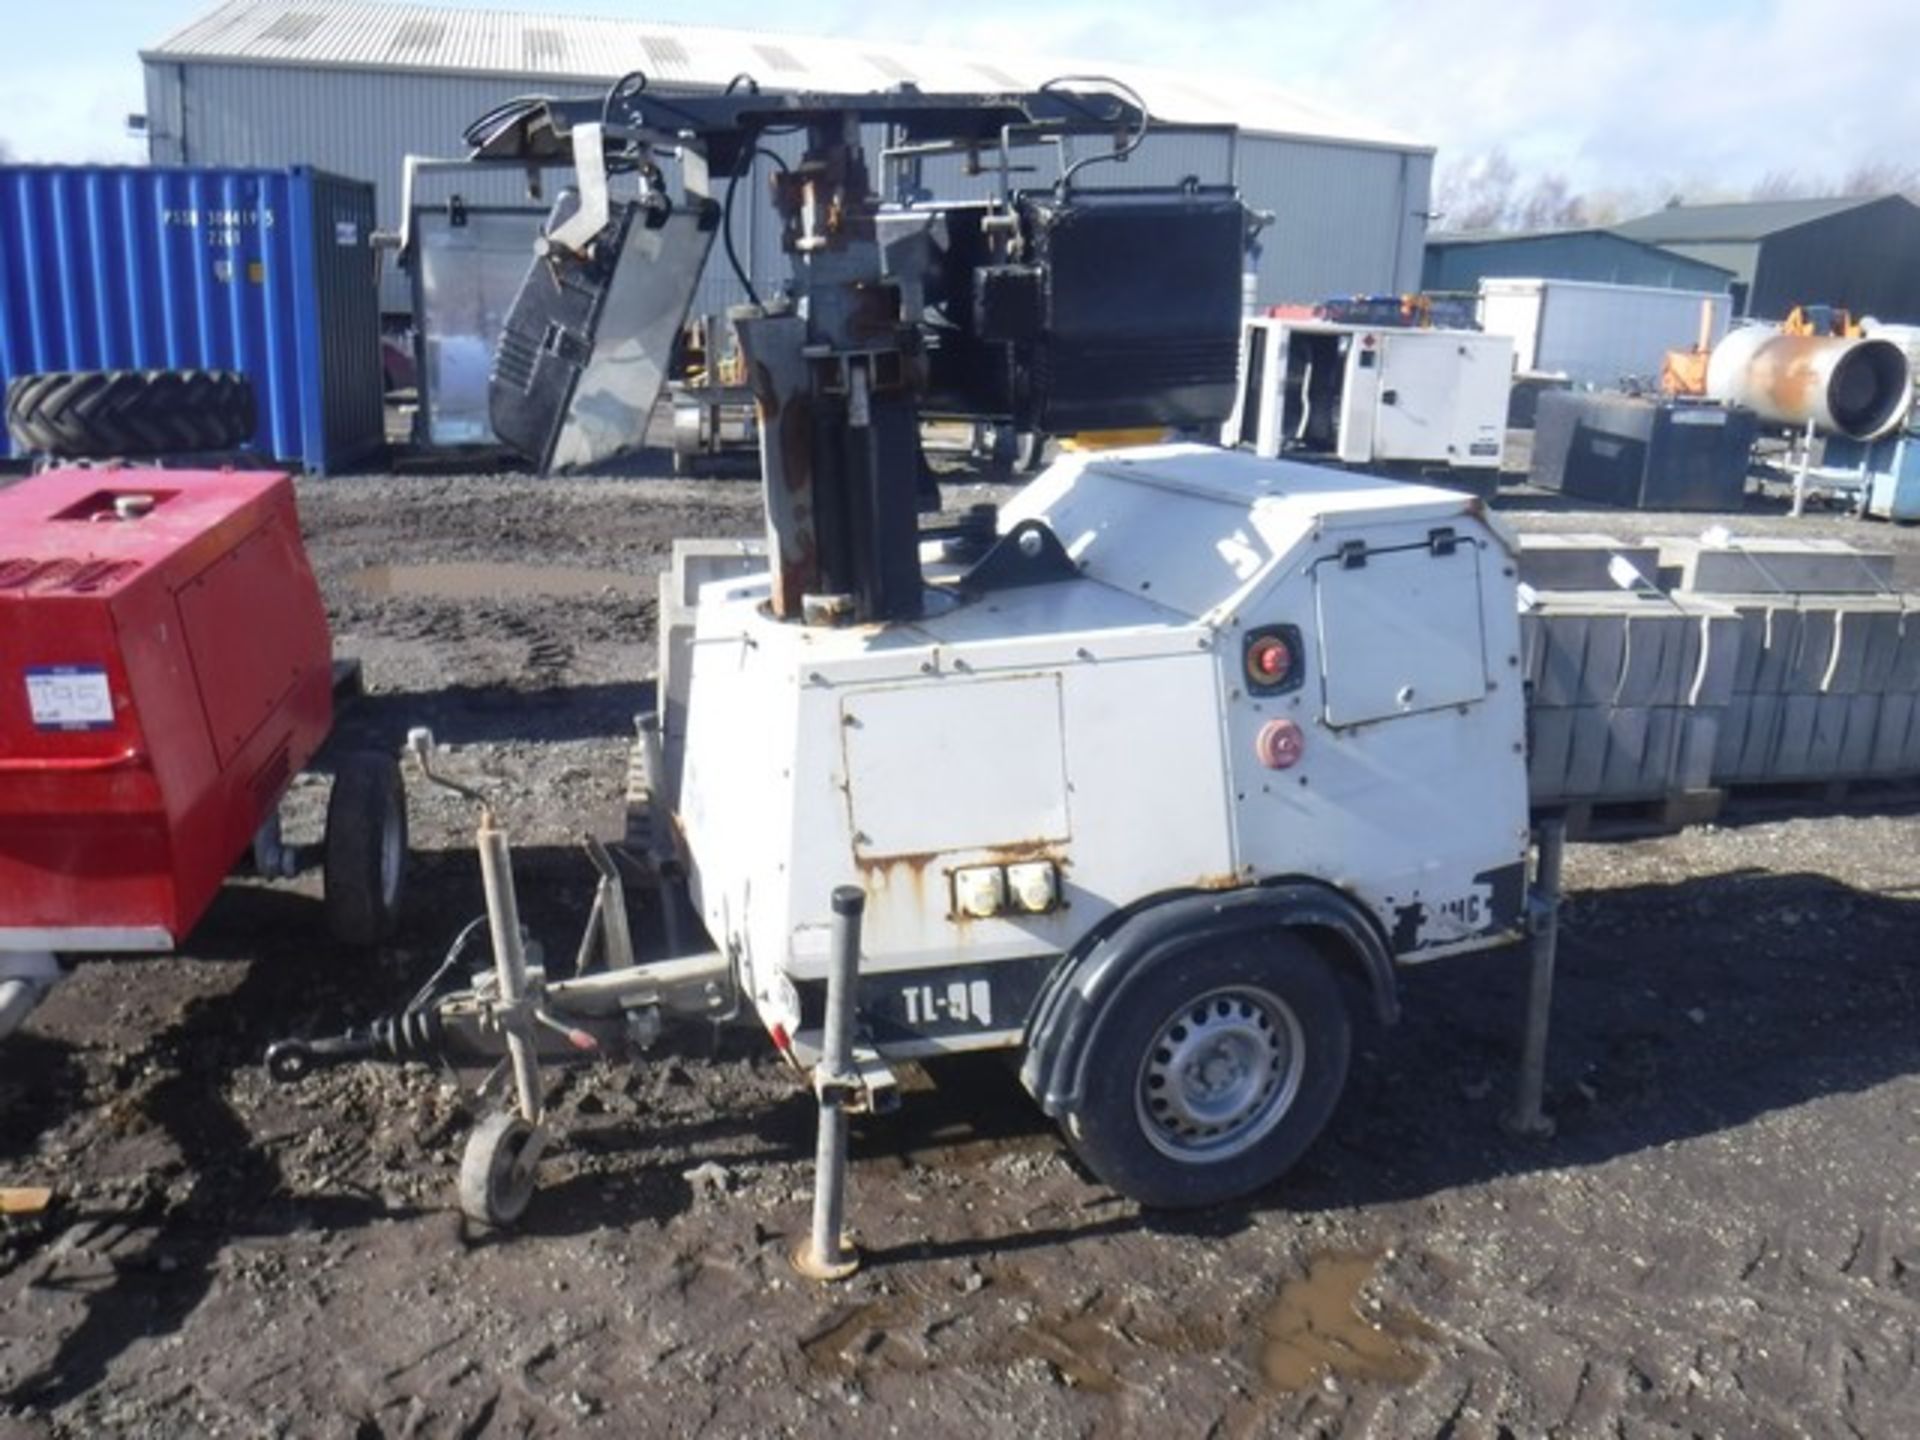 2012 SMC TL90 towerlight. S/N T901. 2659hrs (not verified)